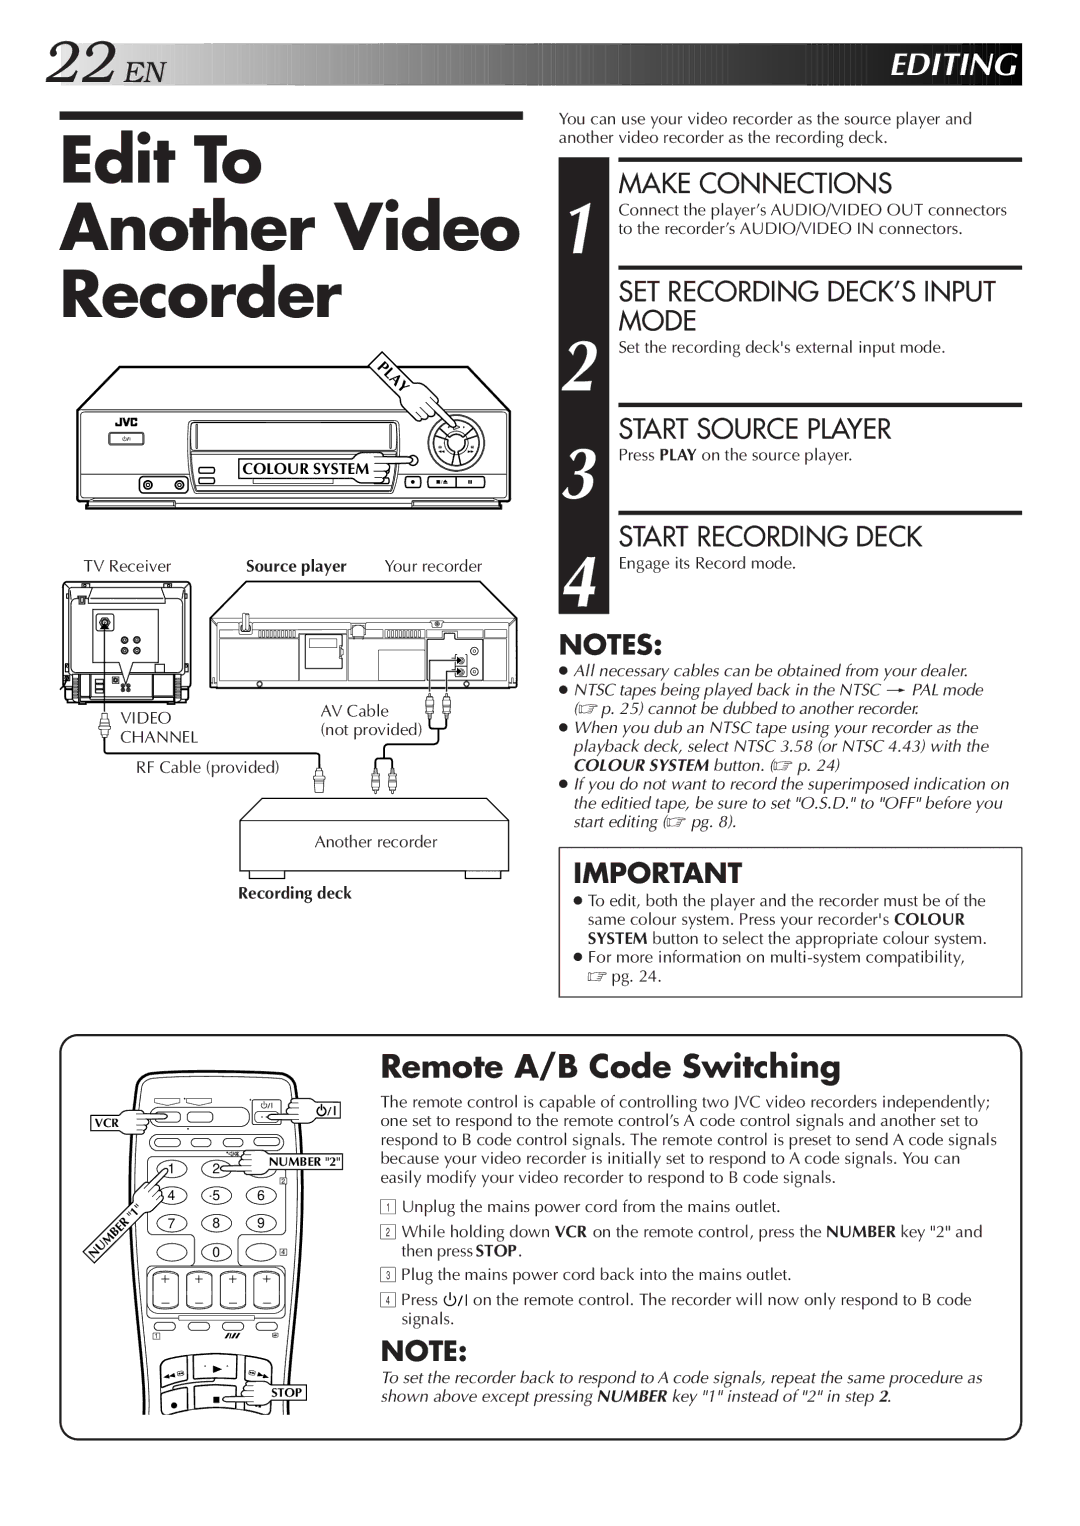 JVC HR-J258EE, HR-J458EE Edit To Another Video Recorder, Editing, Remote A/B Code Switching, TV Receiver, Recording deck 